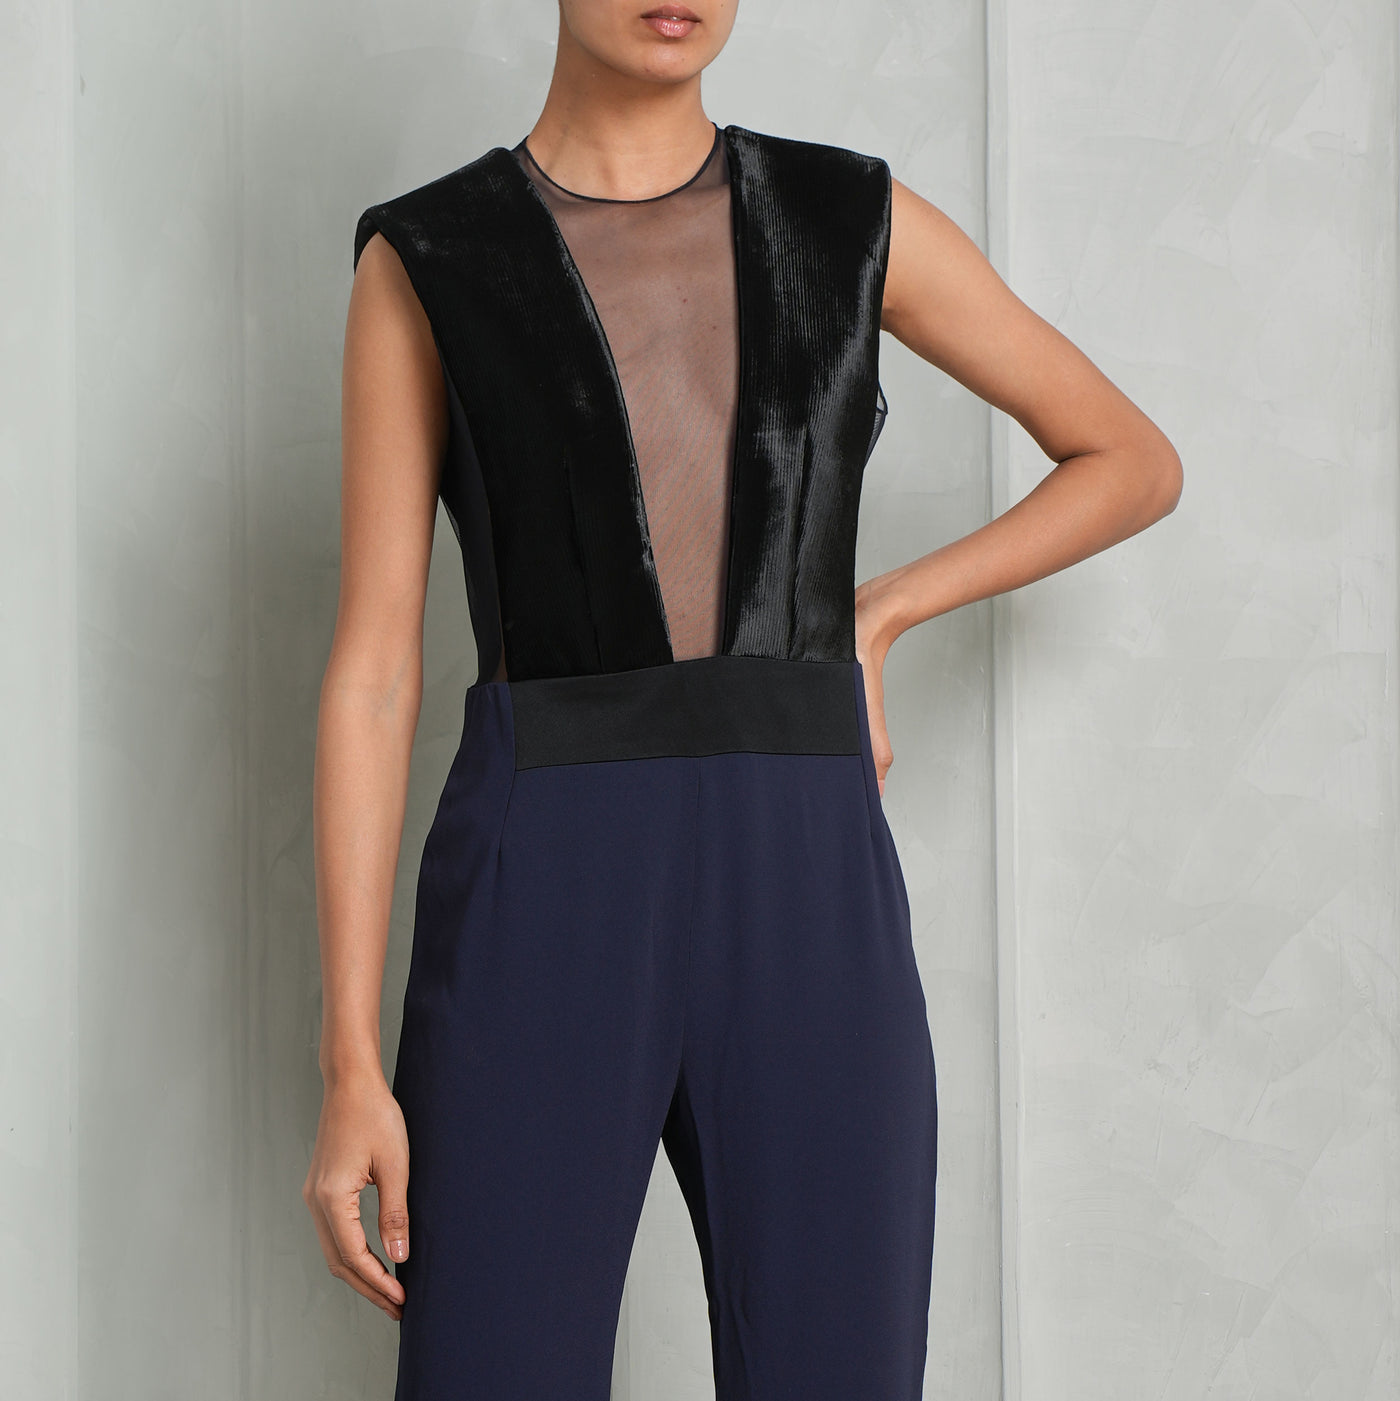 GALVAN LONDON high waisted black and blue jumpsuit